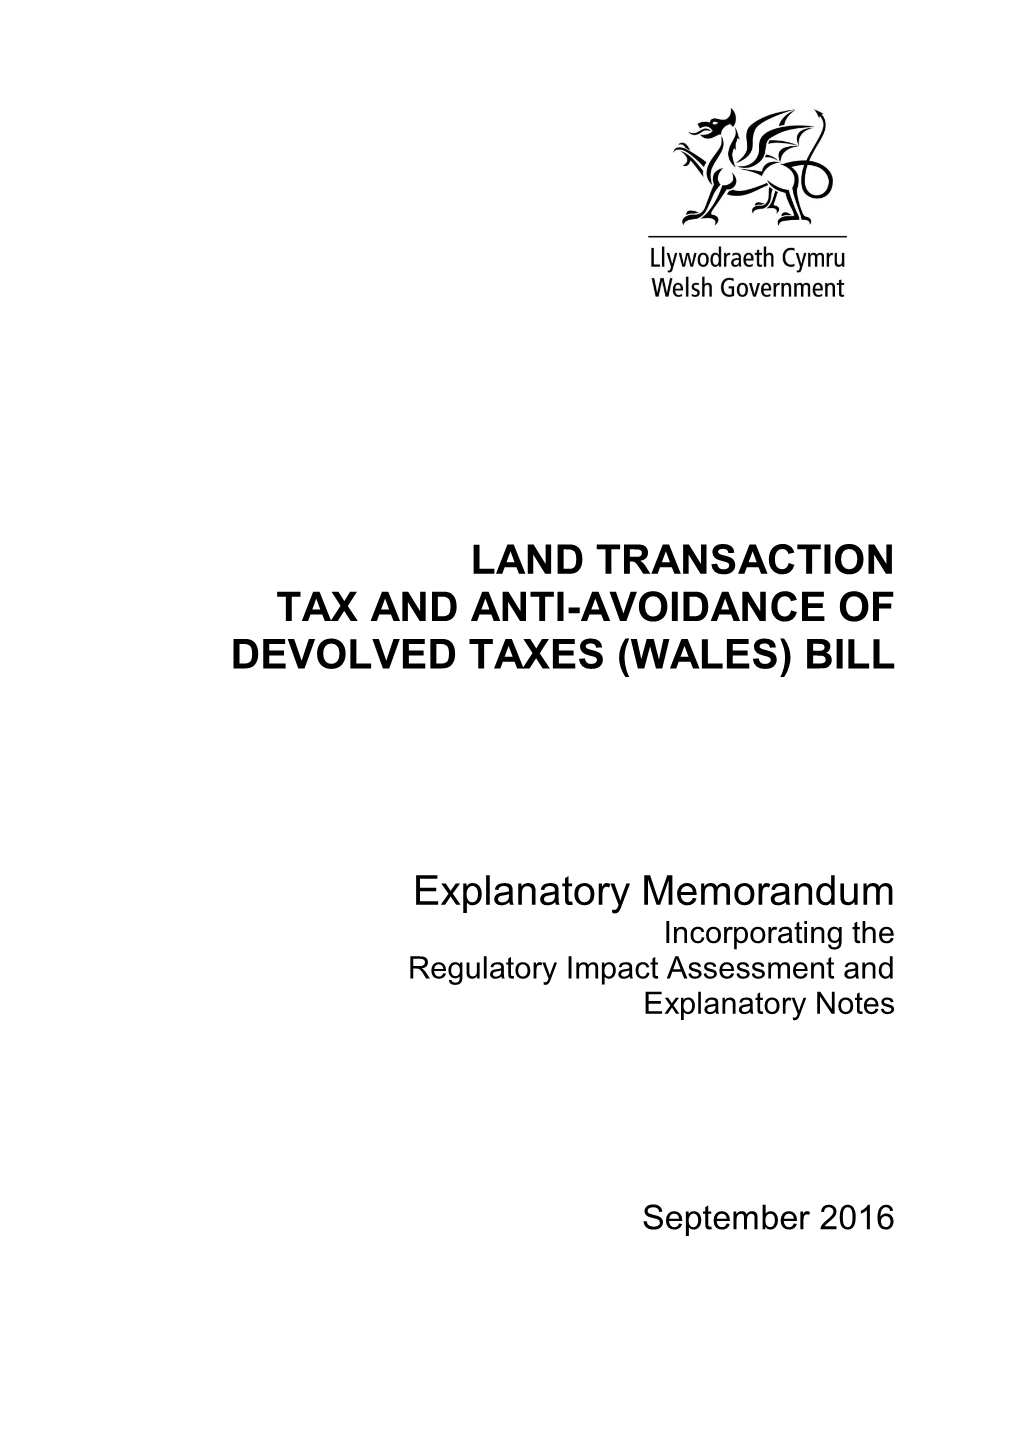 Land Transaction Tax and Anti-Avoidance of Devolved Taxes (Wales) Bill